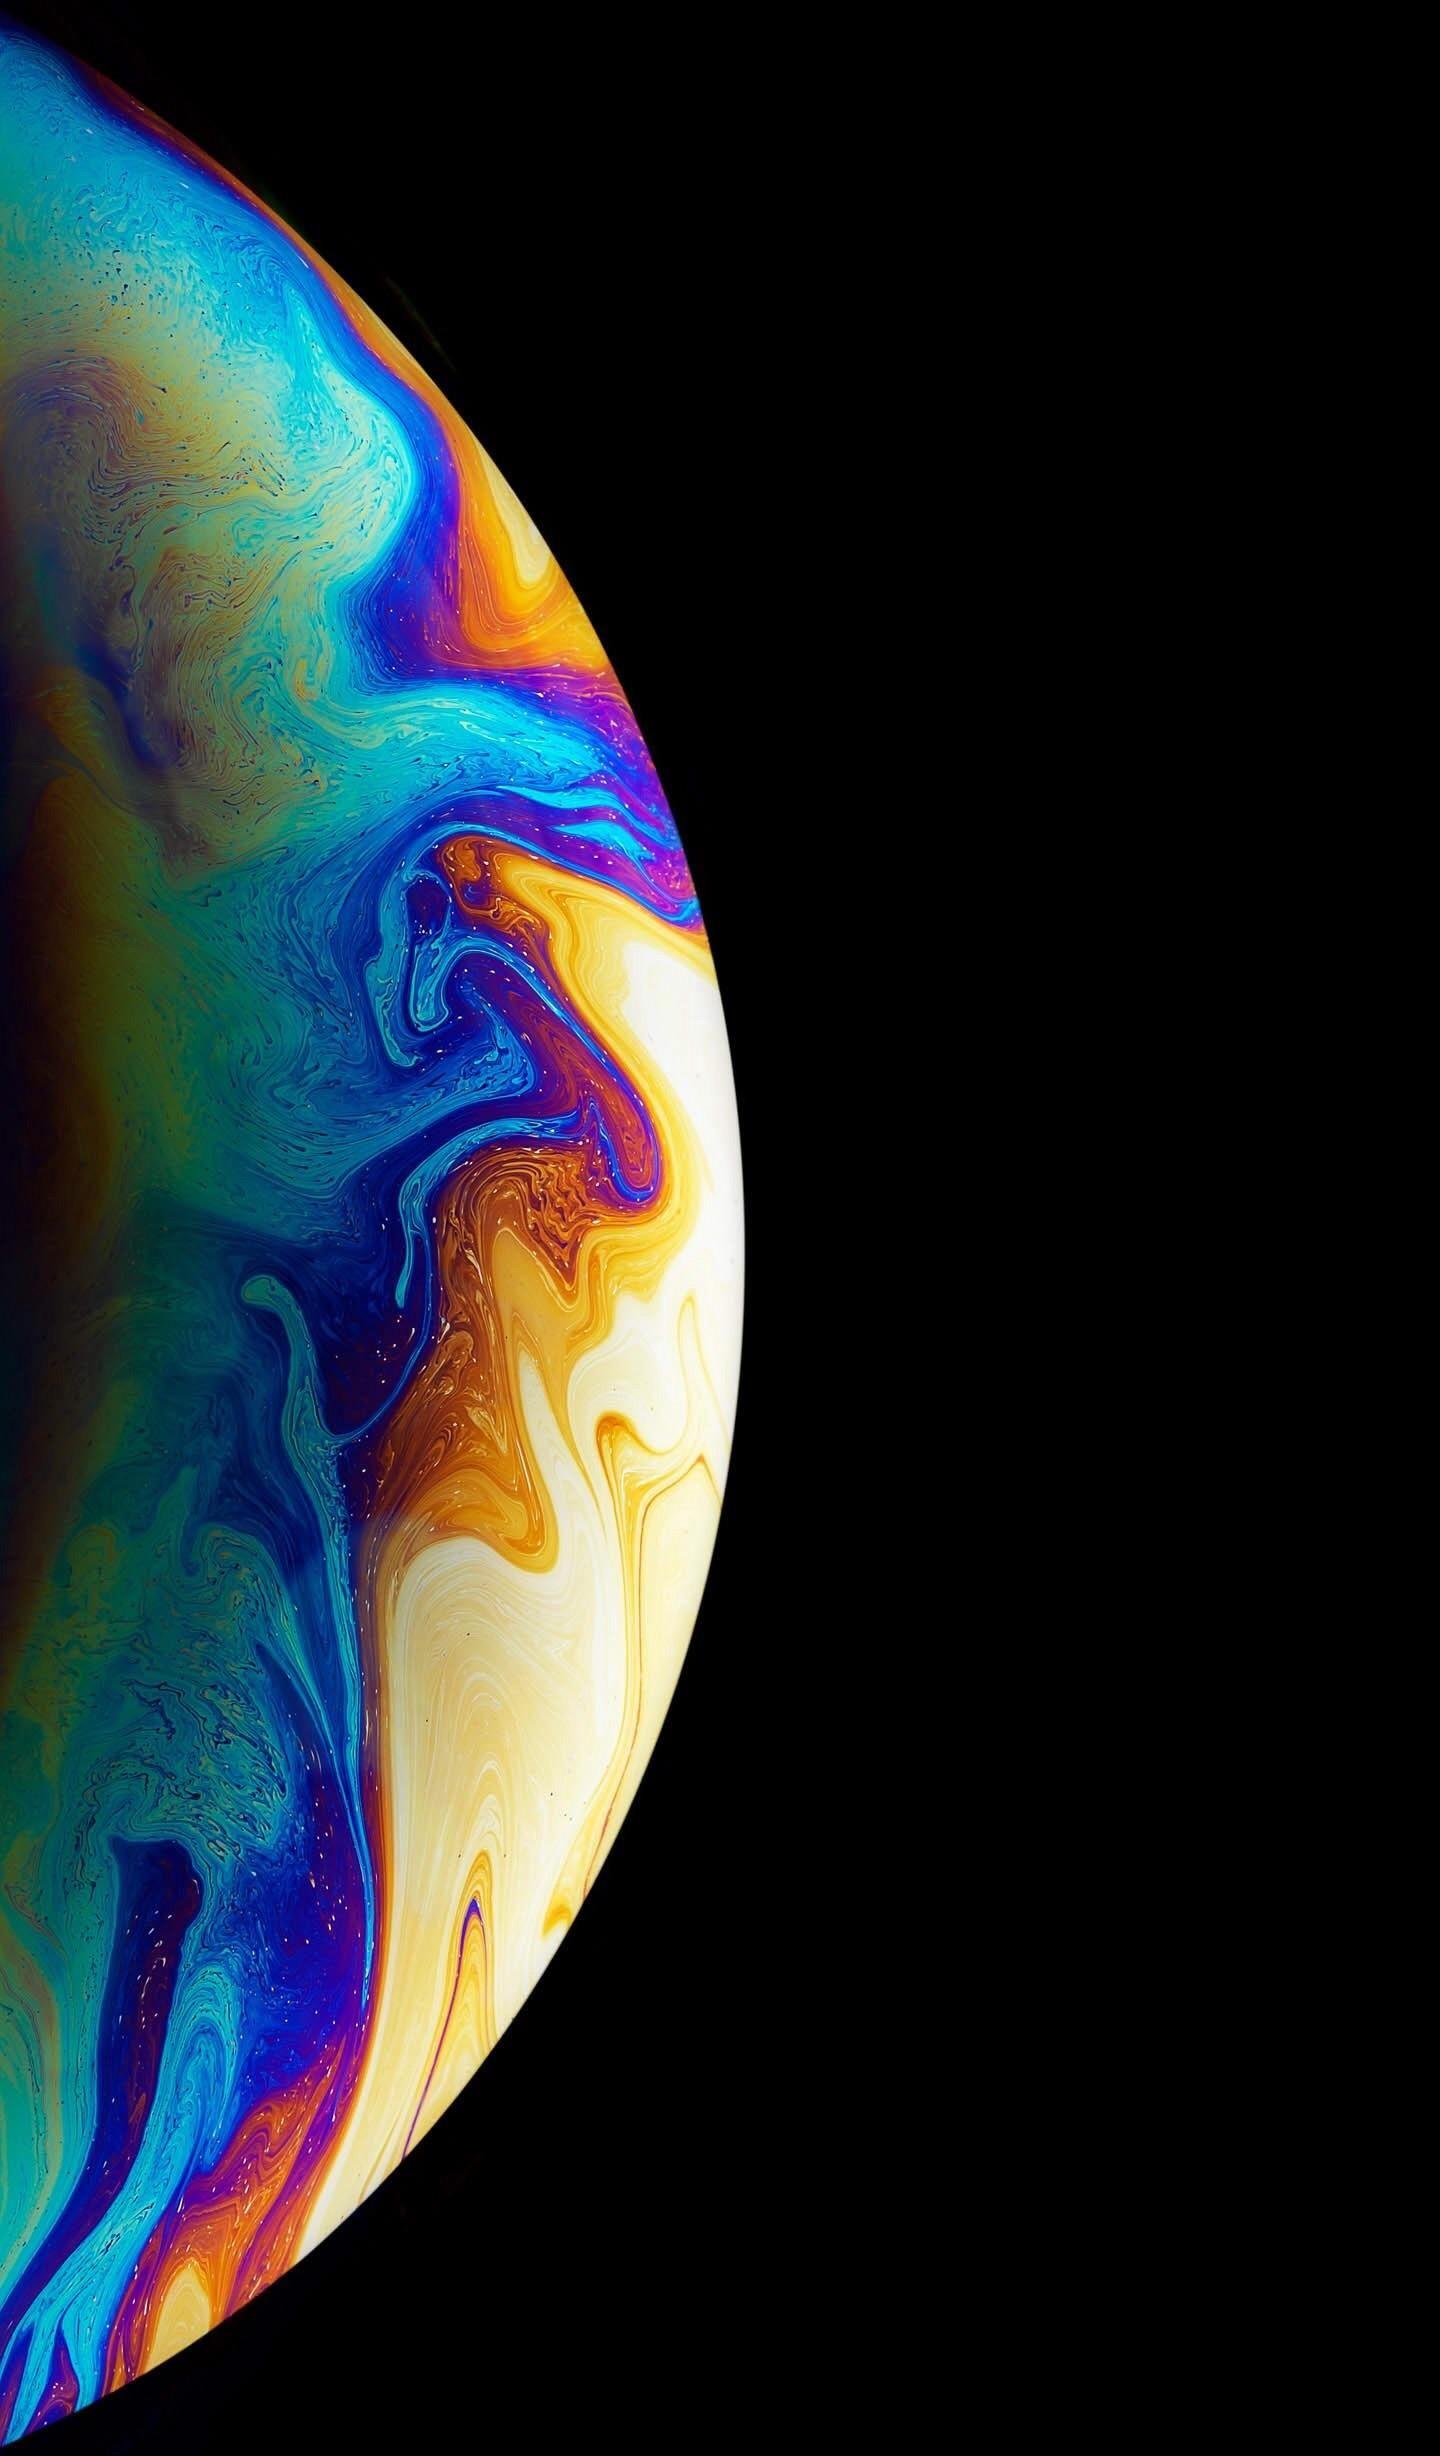 Bubble Planet!. Abstract iphone wallpaper, iPhone wallpaper, Live